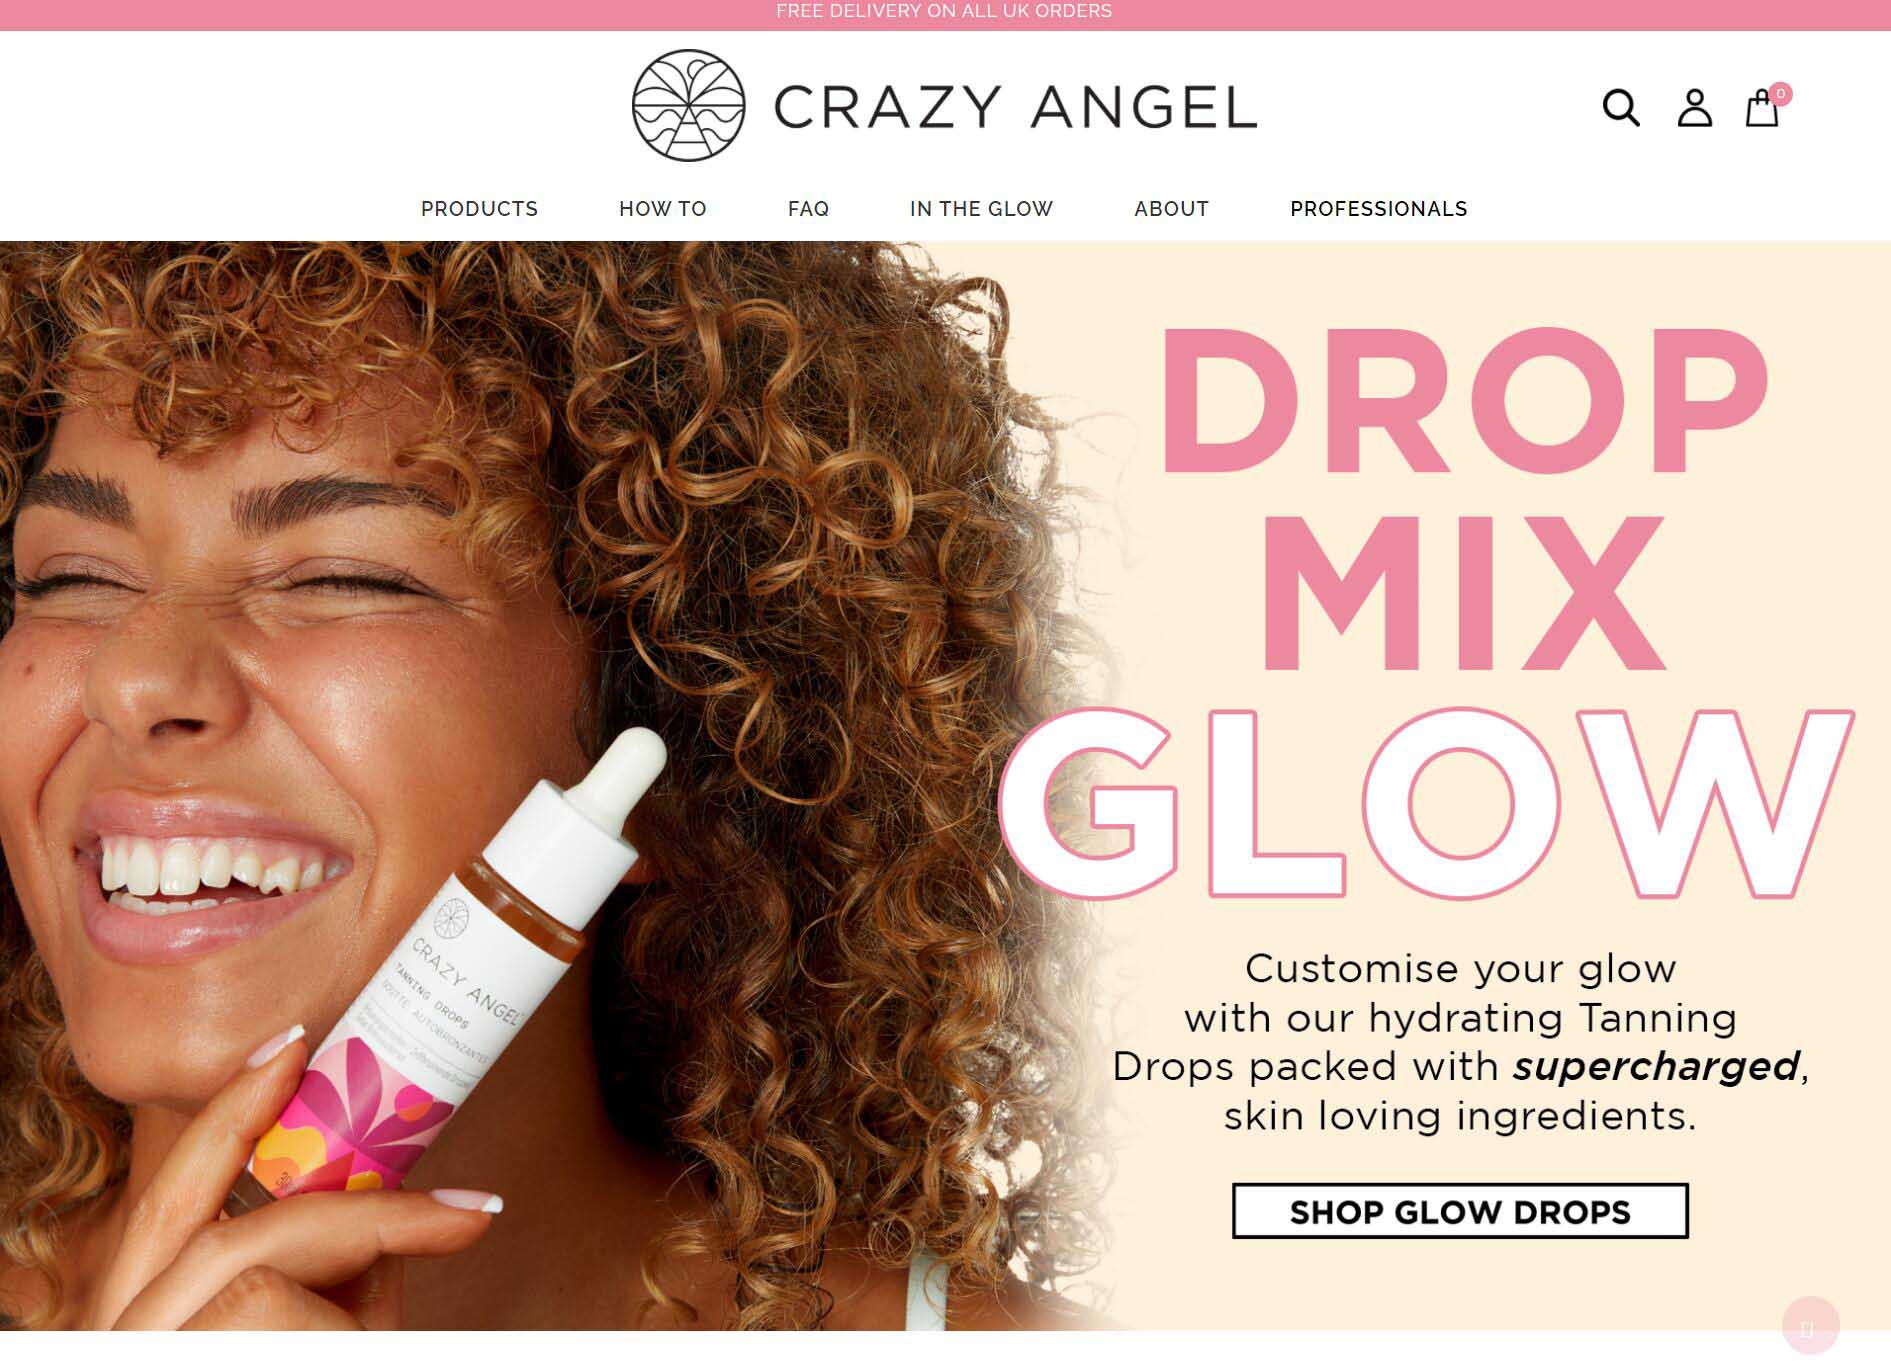 New offer launched: Crazy Angel Affiliate Program